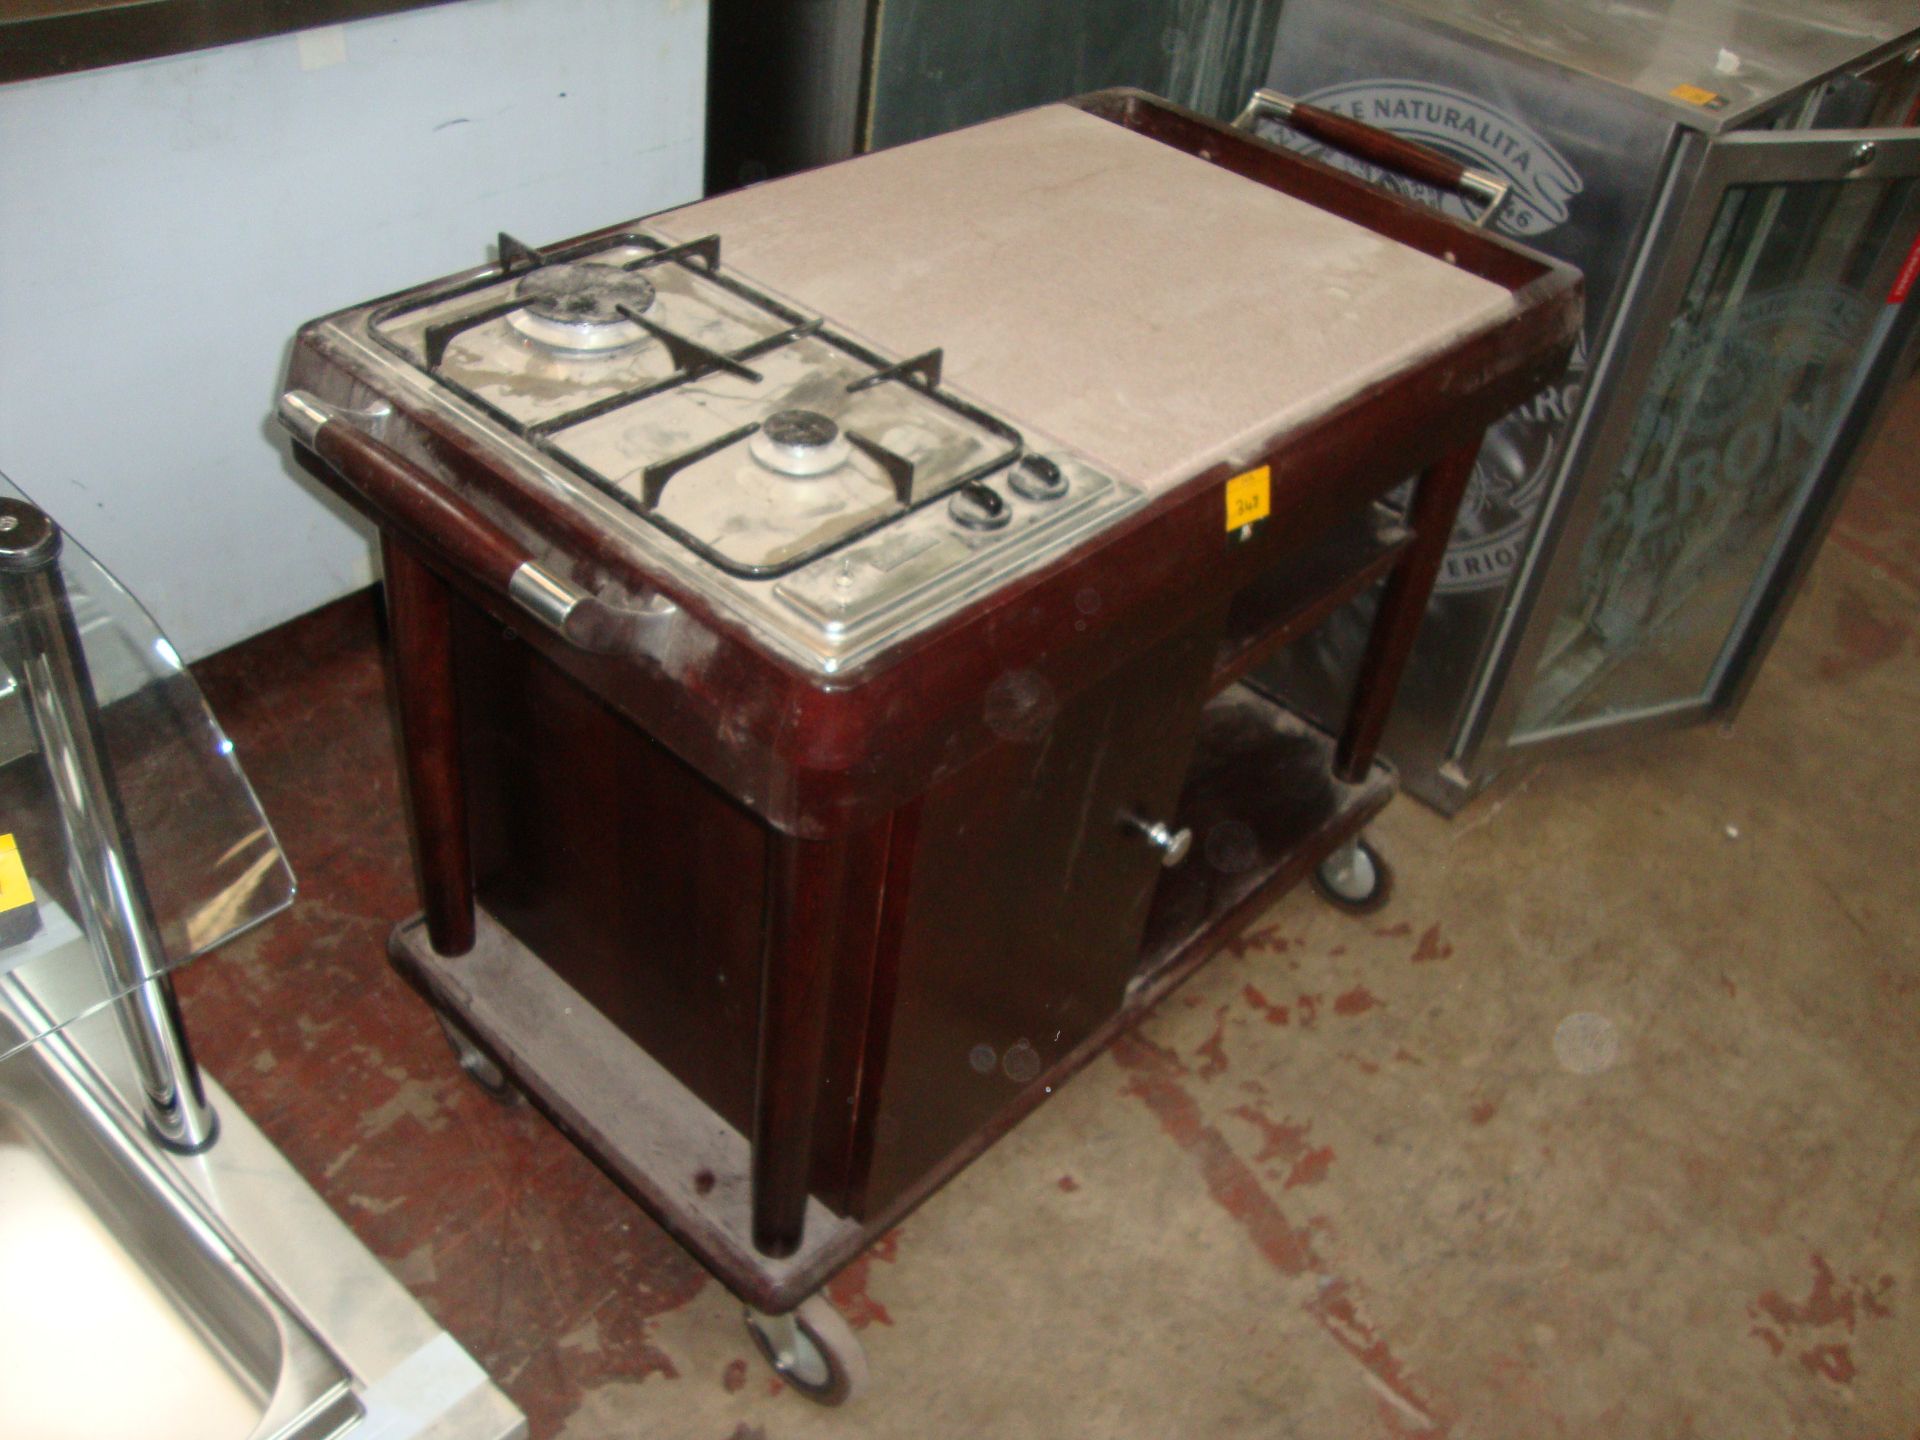 Baumatic serving trolley with built-in twin gas hobIMPORTANT: Please remember goods successfully bid - Image 2 of 3